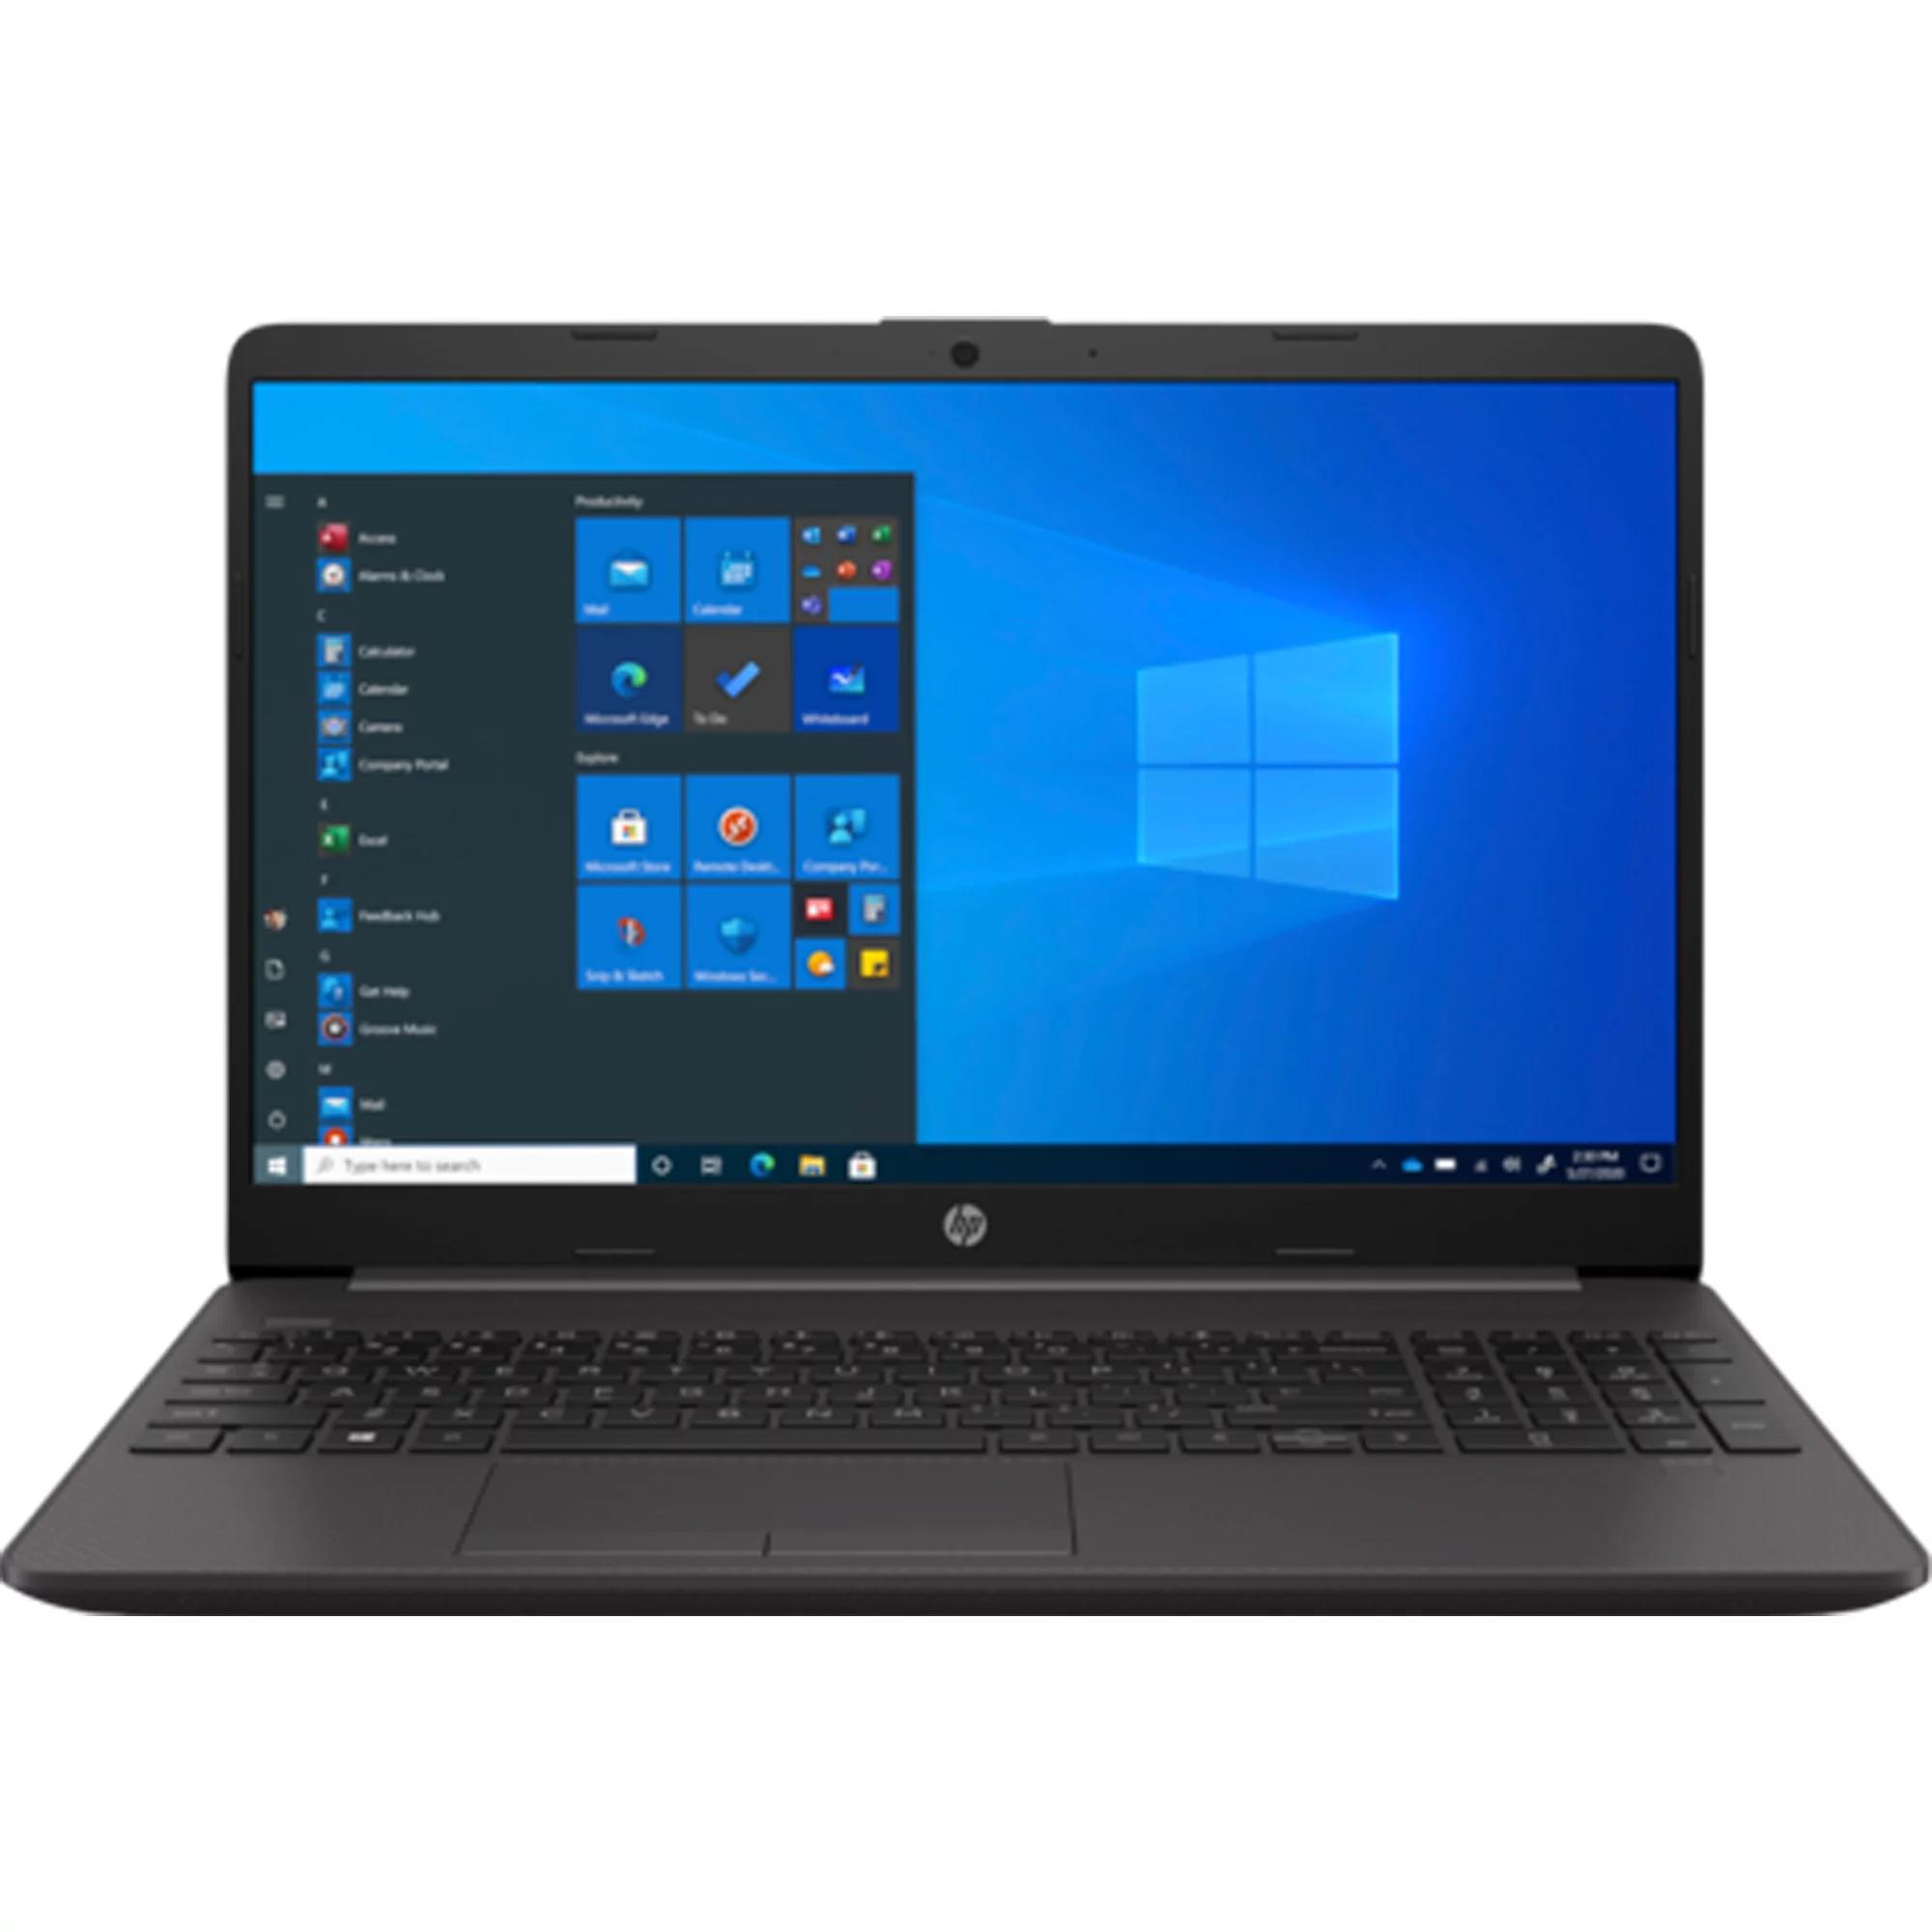 Hp 250 laptop computer: reliable and affordable with impressive performance